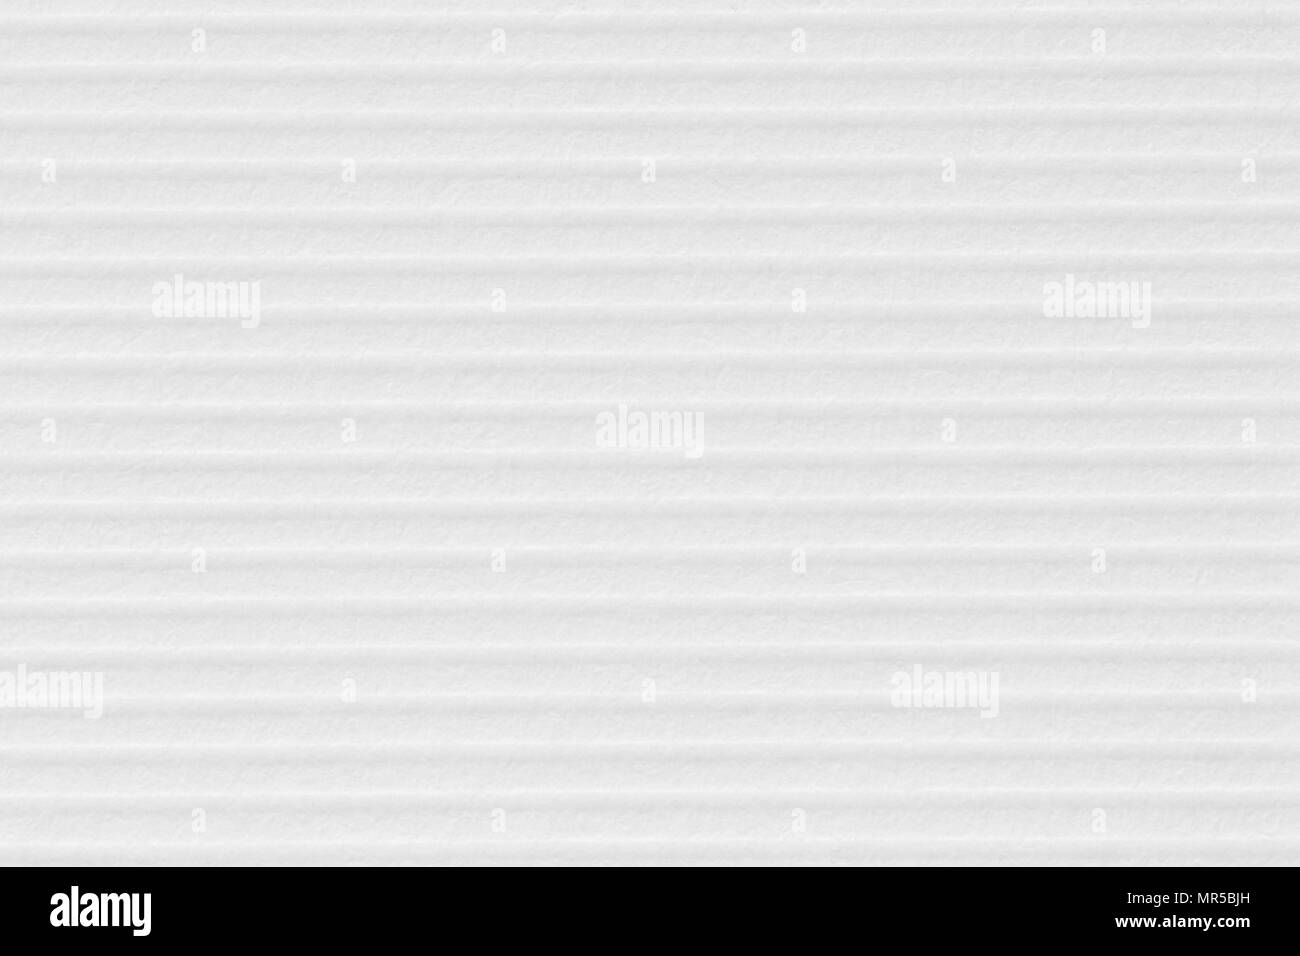 White stripped paper texture background Stock Photo - Alamy